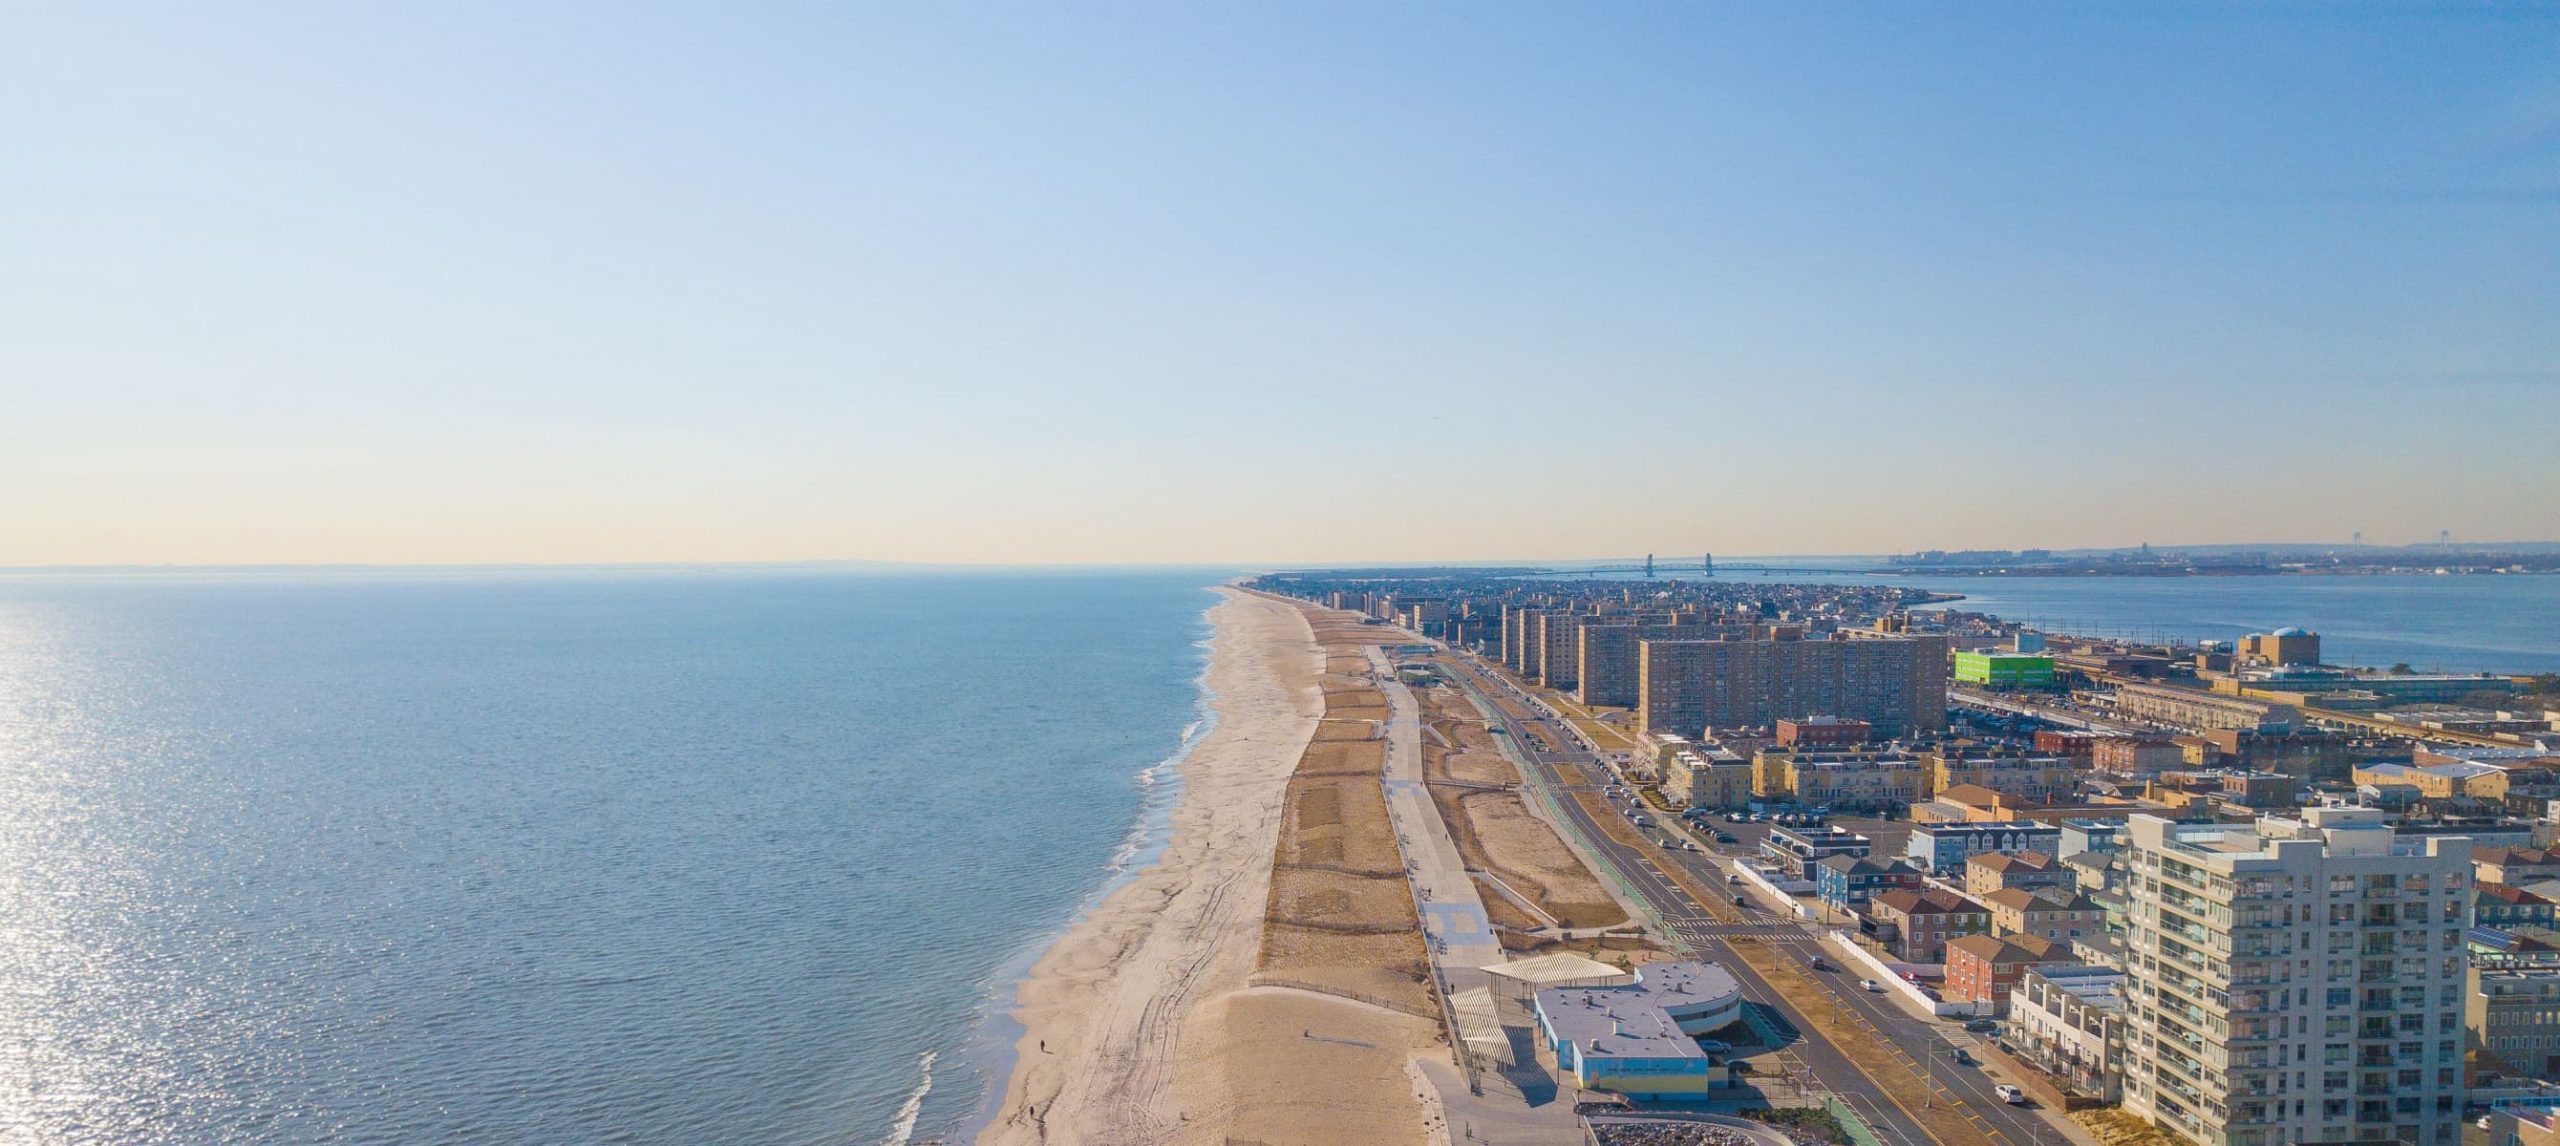 8 Best Beaches In New York To Visit This Summer